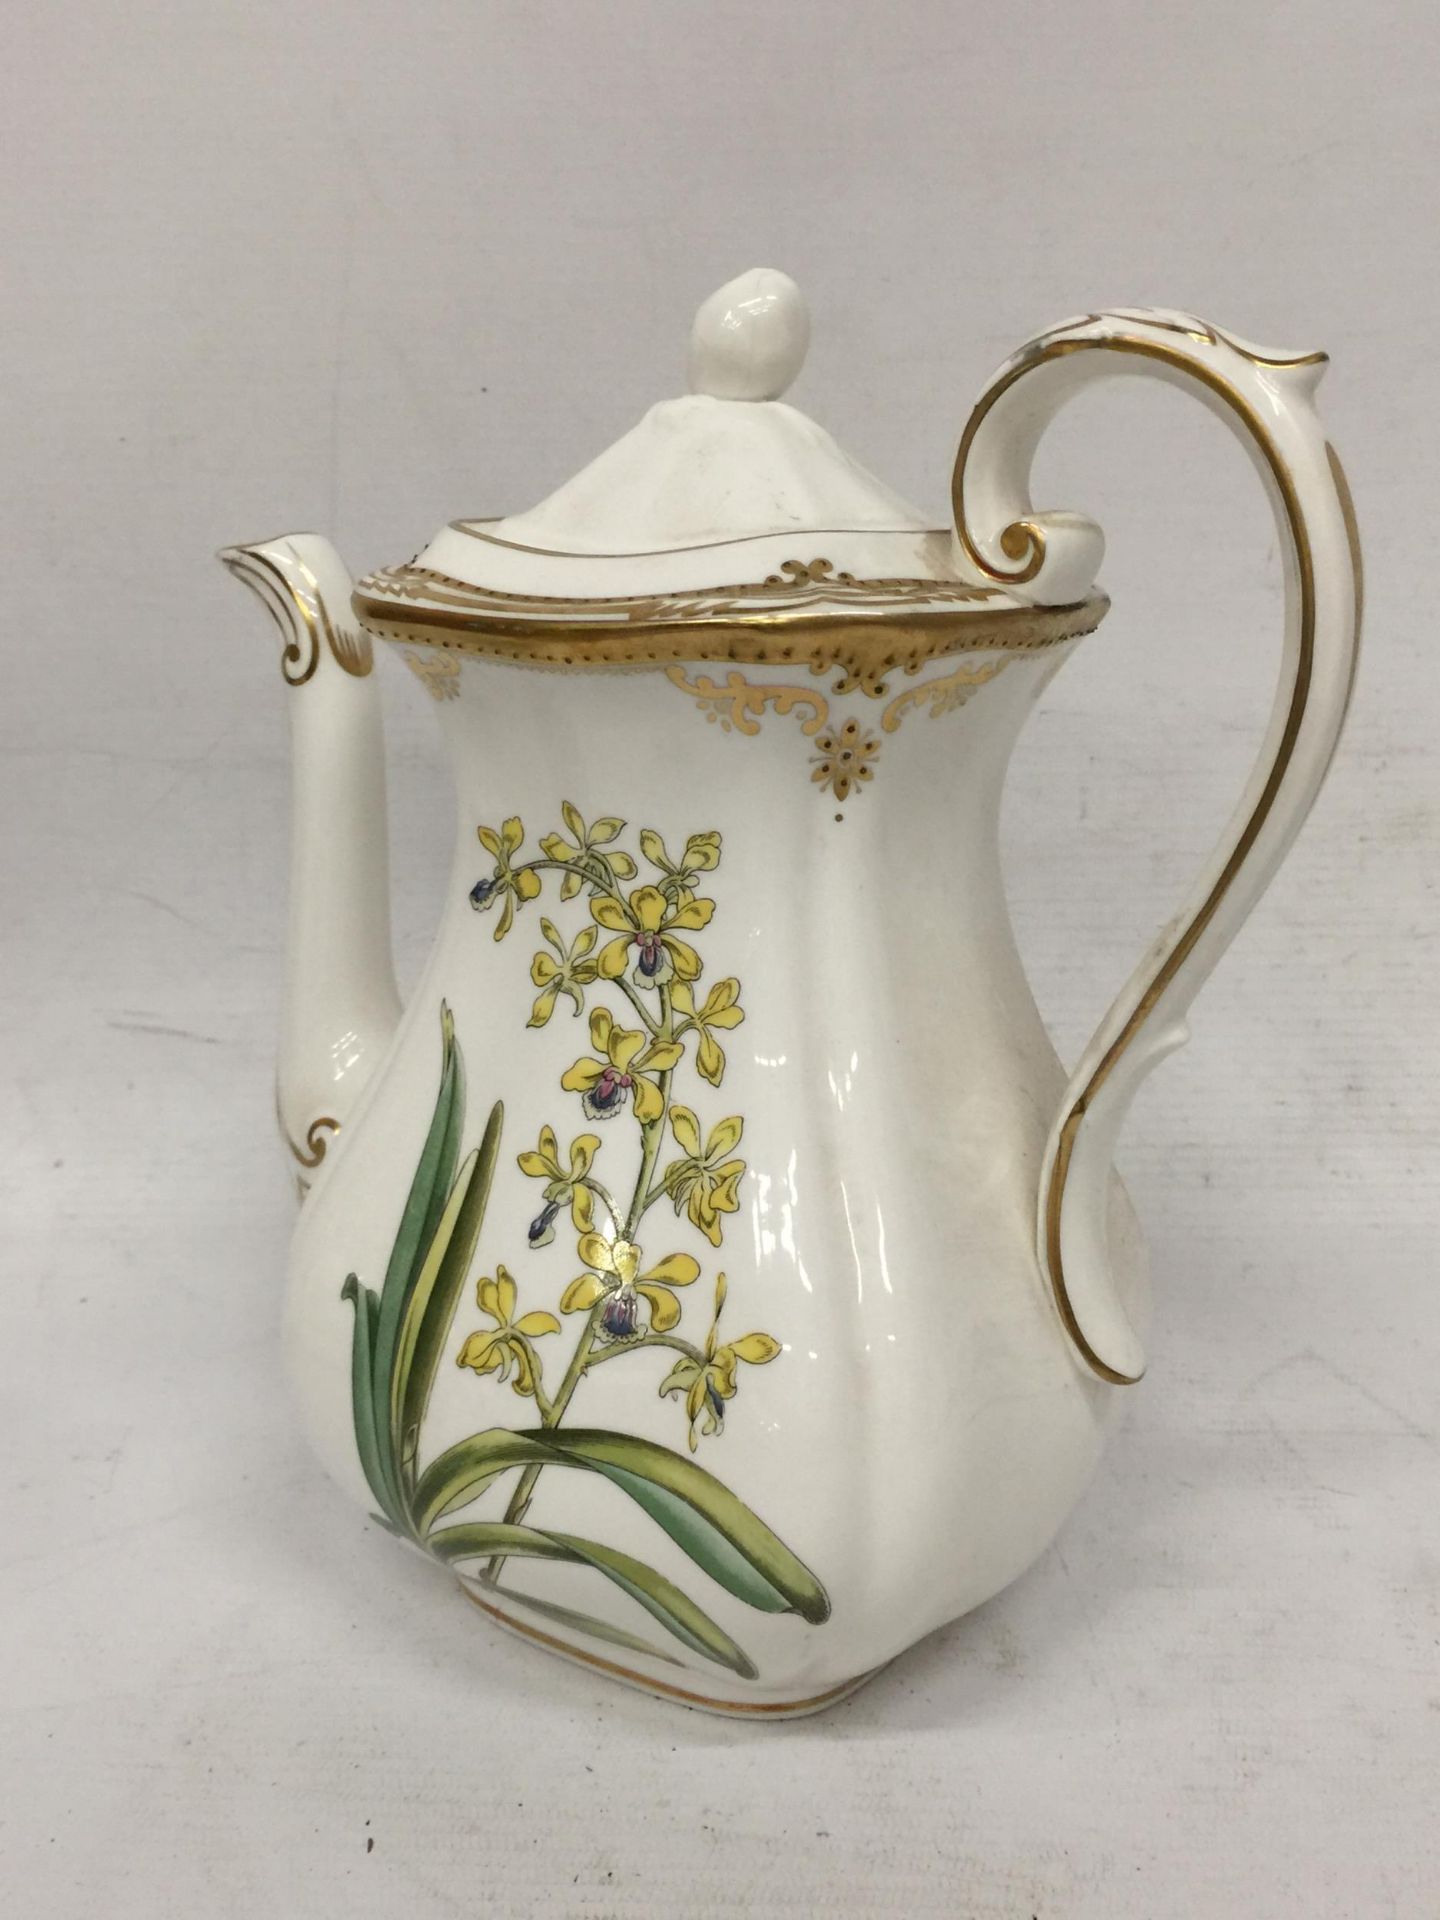 THREE PIECES OF SPODE CERAMICS TO INCLUDE SPODE AERIDES COFFEE POT, STAFFORD FLOWERS CREAM JUG AND - Image 2 of 8